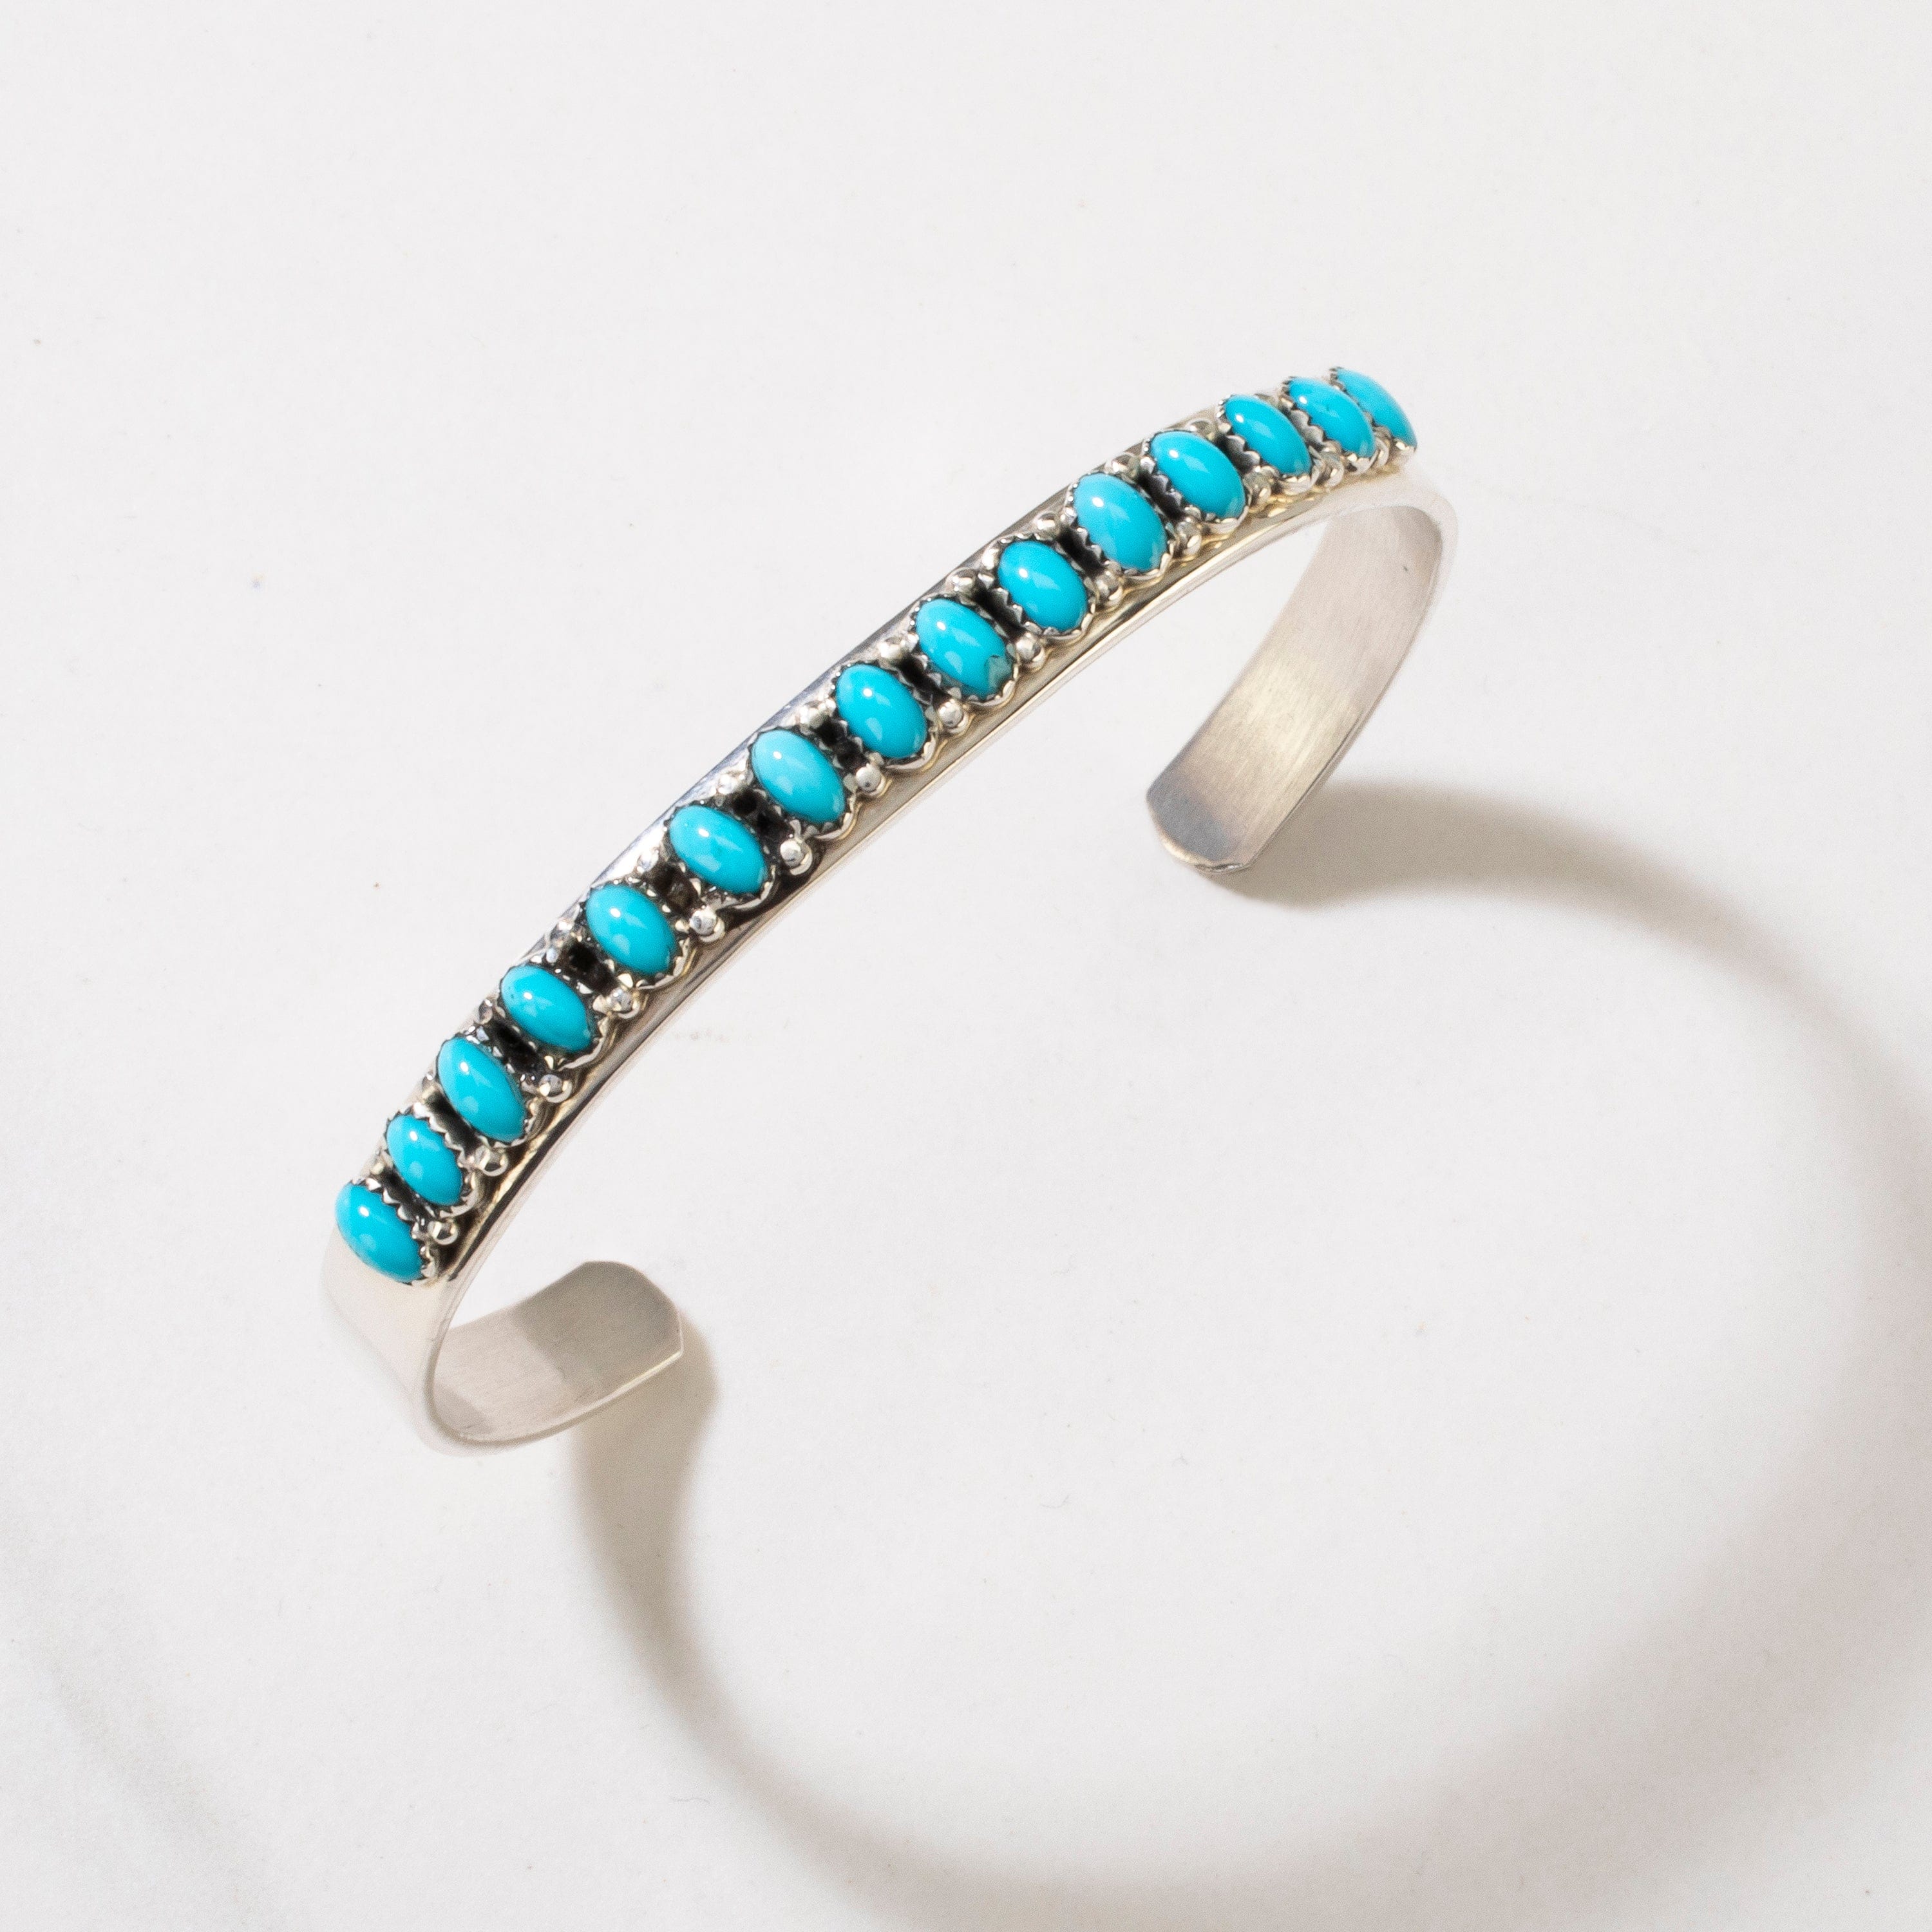 Kalifano Native American Jewelry Patrick Yazzie Sleeping Beauty Turquoise Navajo USA Native American Made 925 Sterling Silver Cuff NAB800.016